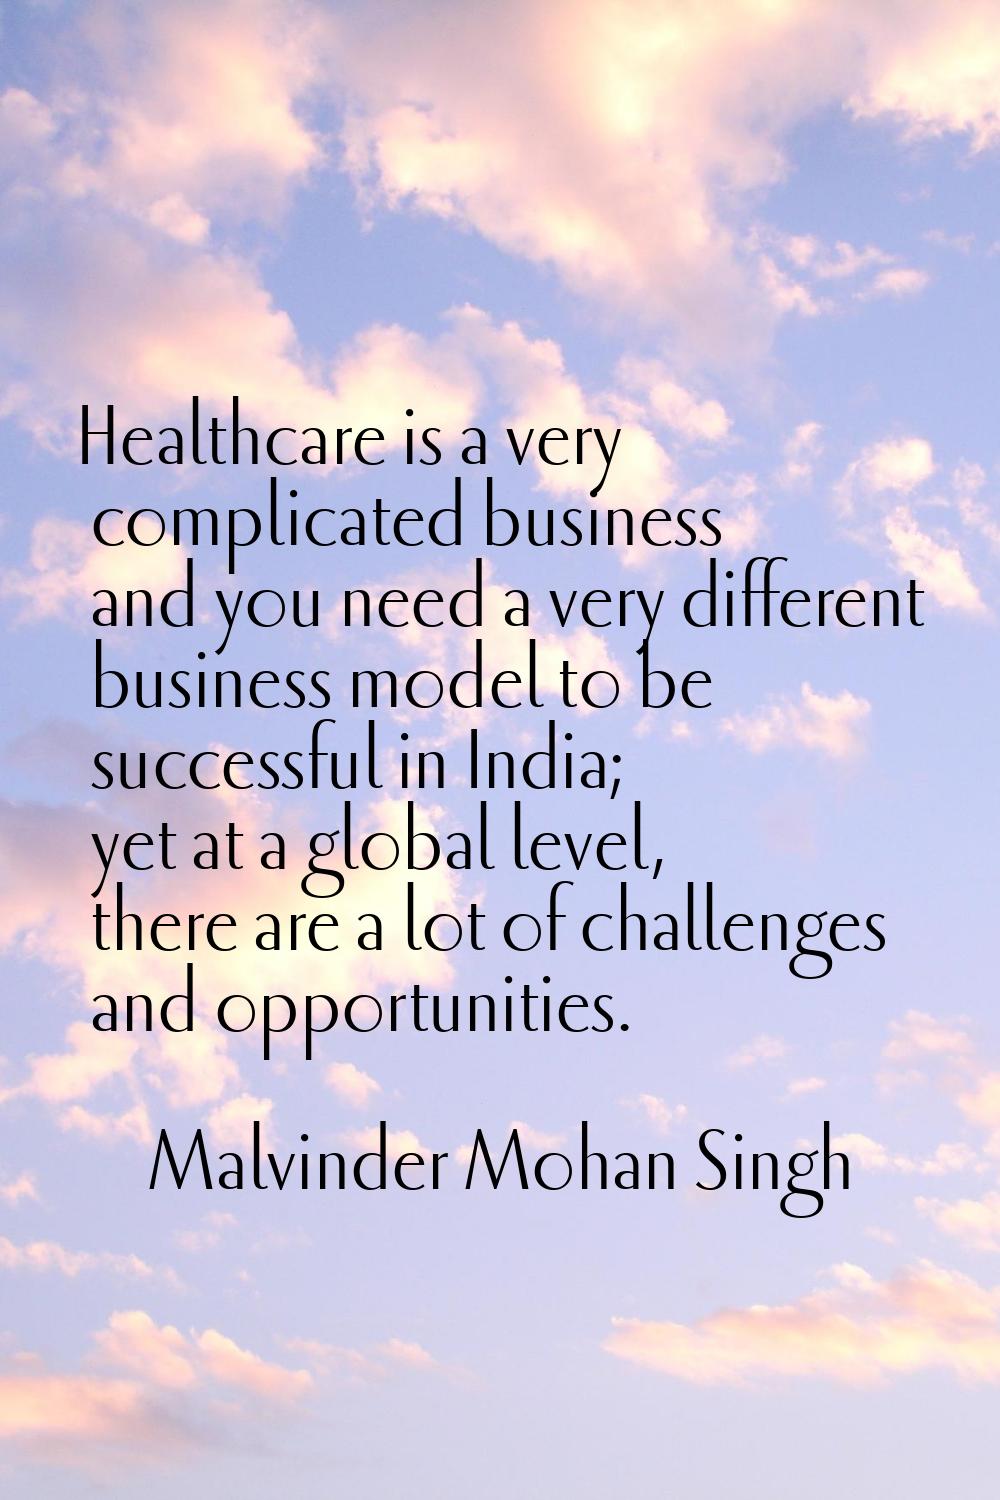 Healthcare is a very complicated business and you need a very different business model to be succes